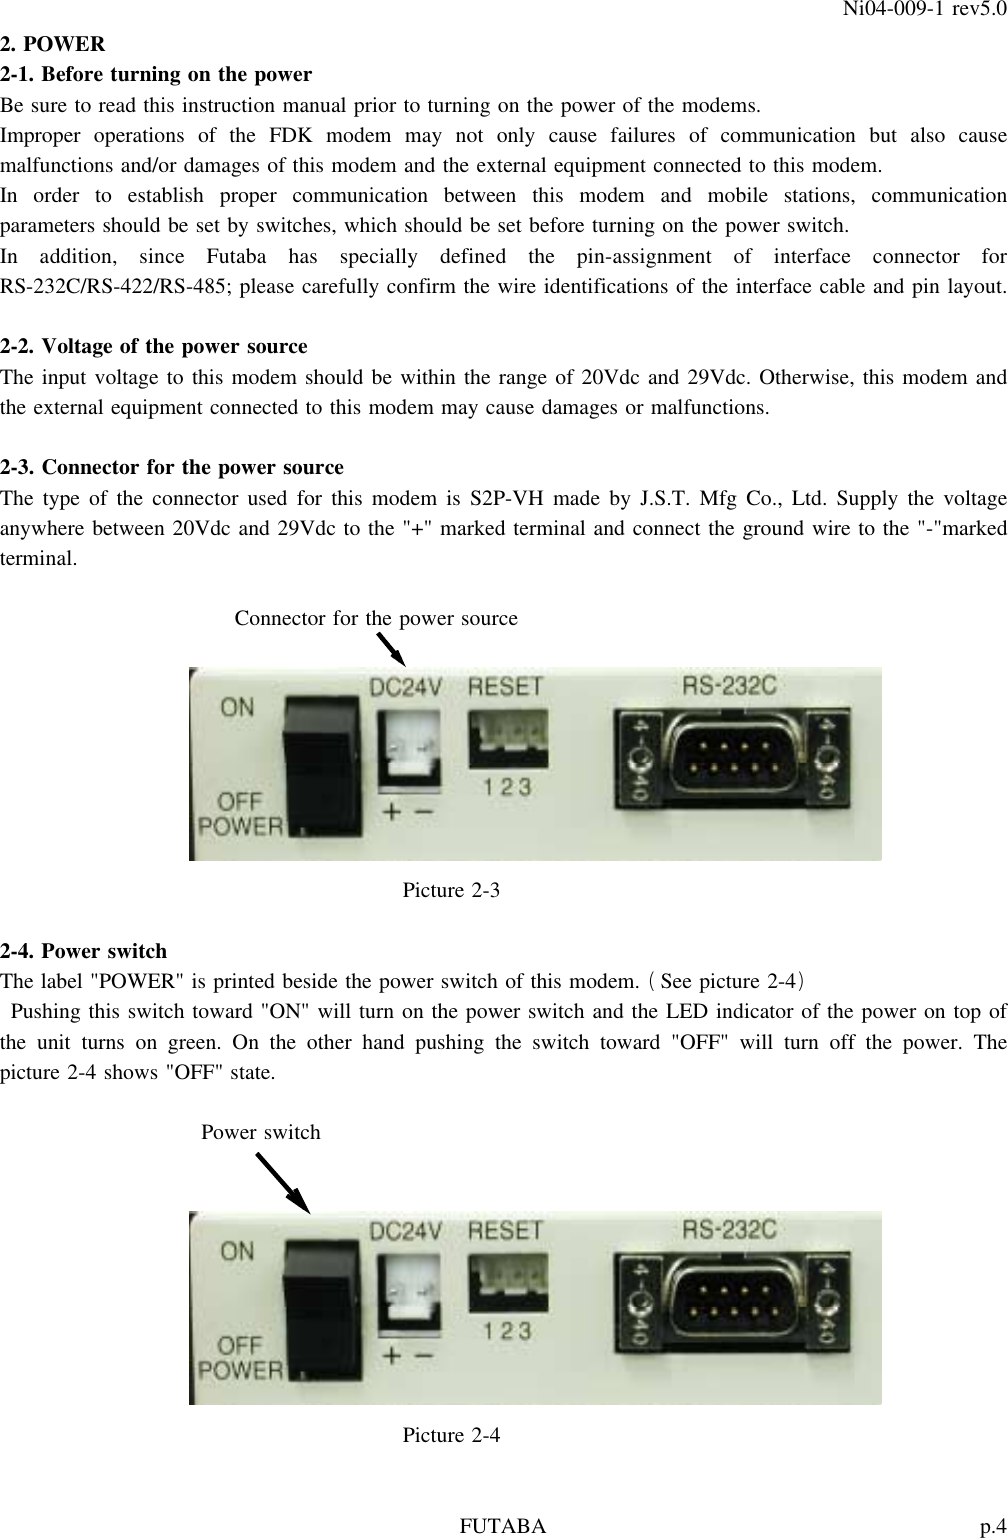 p.4FUTABANi04-009-1 rev5.02. POWER2-1. Before turning on the powerBe sure to read this instruction manual prior to turning on the power of the modems.Improper operations of the FDK modem may not only cause failures of communication but also causemalfunctions and/or damages of this modem and the external equipment connected to this modem.In order to establish proper communication between this modem and mobile stations, communicationparameters should be set by switches, which should be set before turning on the power switch.In addition, since Futaba has specially defined the pin-assignment of interface connector forRS-232C/RS-422/RS-485; please carefully confirm the wire identifications of the interface cable and pin layout.2-2. Voltage of the power sourceThe input voltage to this modem should be within the range of 20Vdc and 29Vdc. Otherwise, this modem andthe external equipment connected to this modem may cause damages or malfunctions.2-3. Connector for the power sourceThe type of the connector used for this modem is S2P-VH made by J.S.T. Mfg Co., Ltd. Supply the voltageanywhere between 20Vdc and 29Vdc to the &quot;+&quot; marked terminal and connect the ground wire to the &quot;-&quot;markedterminal.Connector for the power sourcePicture 2-32-4. Power switchThe label &quot;POWER&quot; is printed beside the power switch of this modem. See picture 2-4()Pushing this switch toward &quot;ON&quot; will turn on the power switch and the LED indicator of the power on top ofthe unit turns on green. On the other hand pushing the switch toward &quot;OFF&quot; will turn off the power. Thepicture 2-4 shows &quot;OFF&quot; state.Power switchPicture 2-4